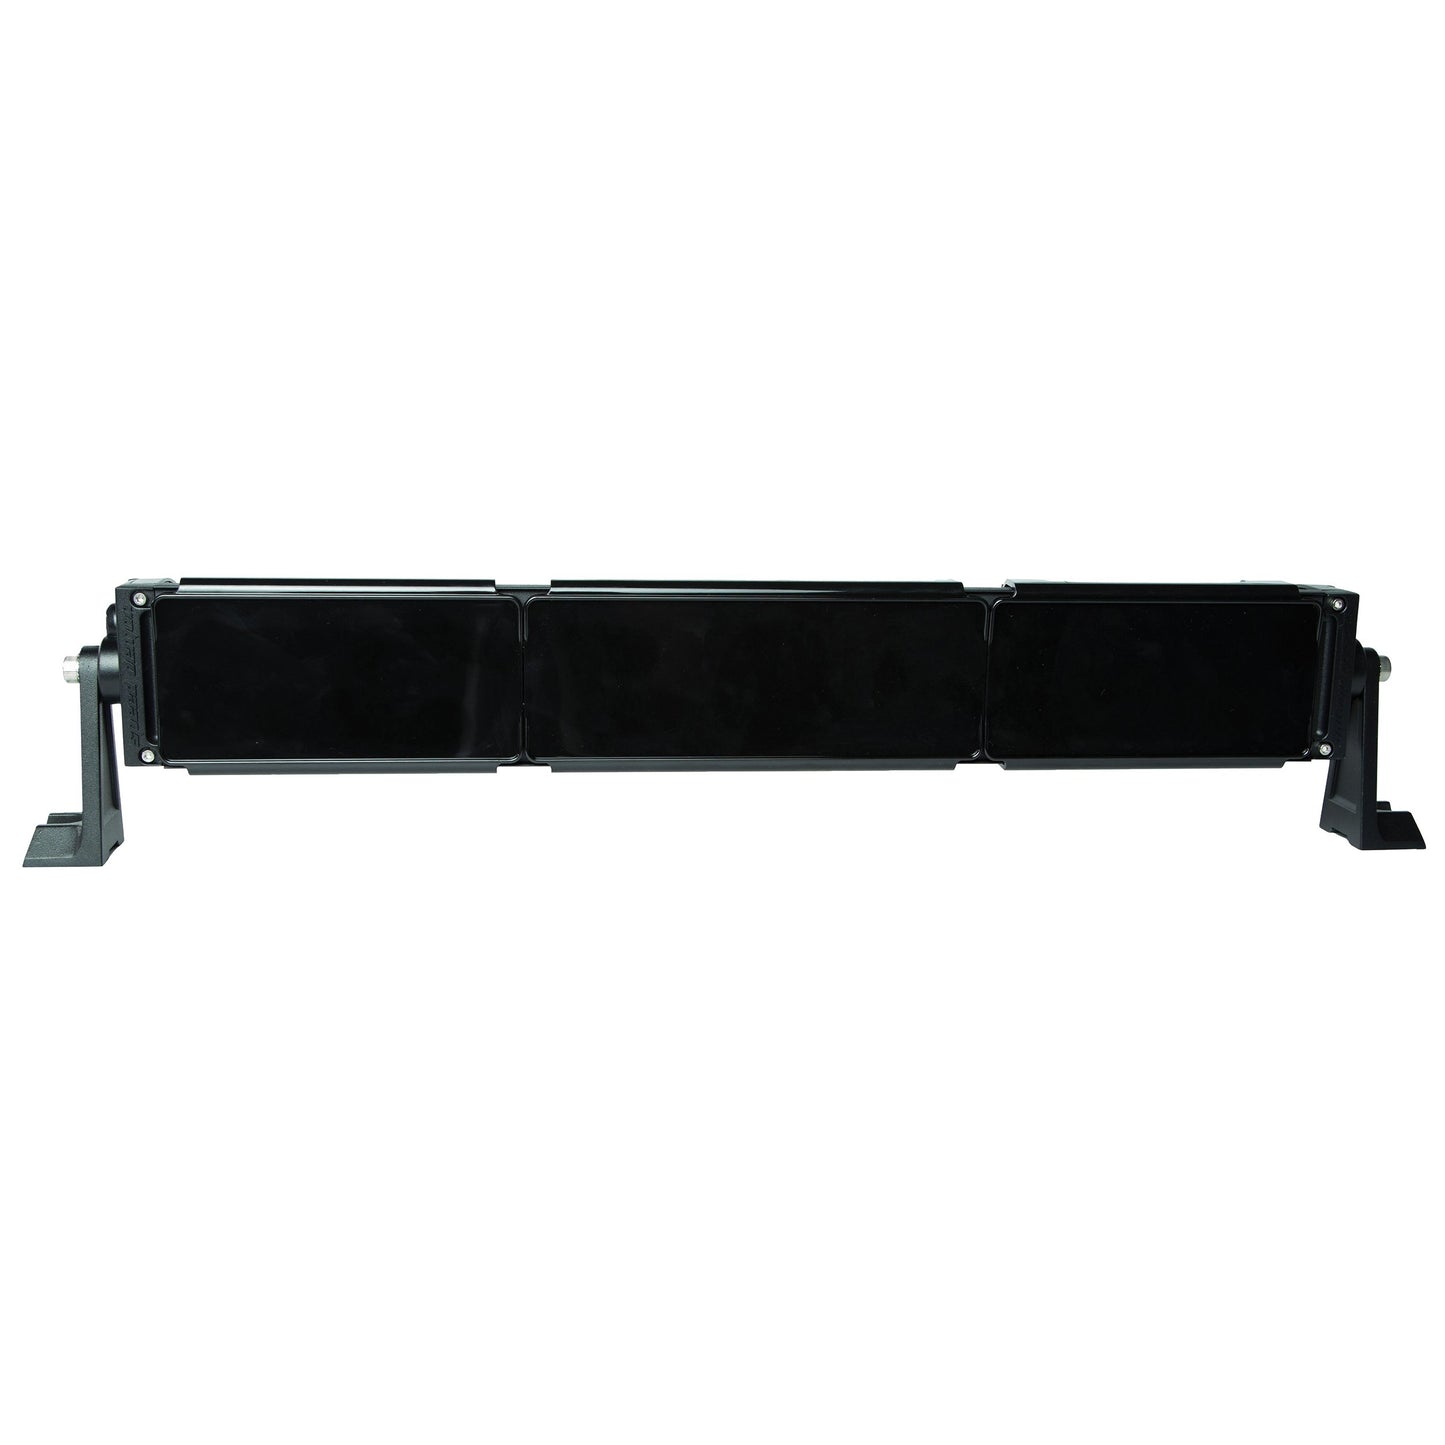 Light Covers for Dual Row LED DRC, DRCX and Infinity Light Bars - 20" 10-30009/10-30015